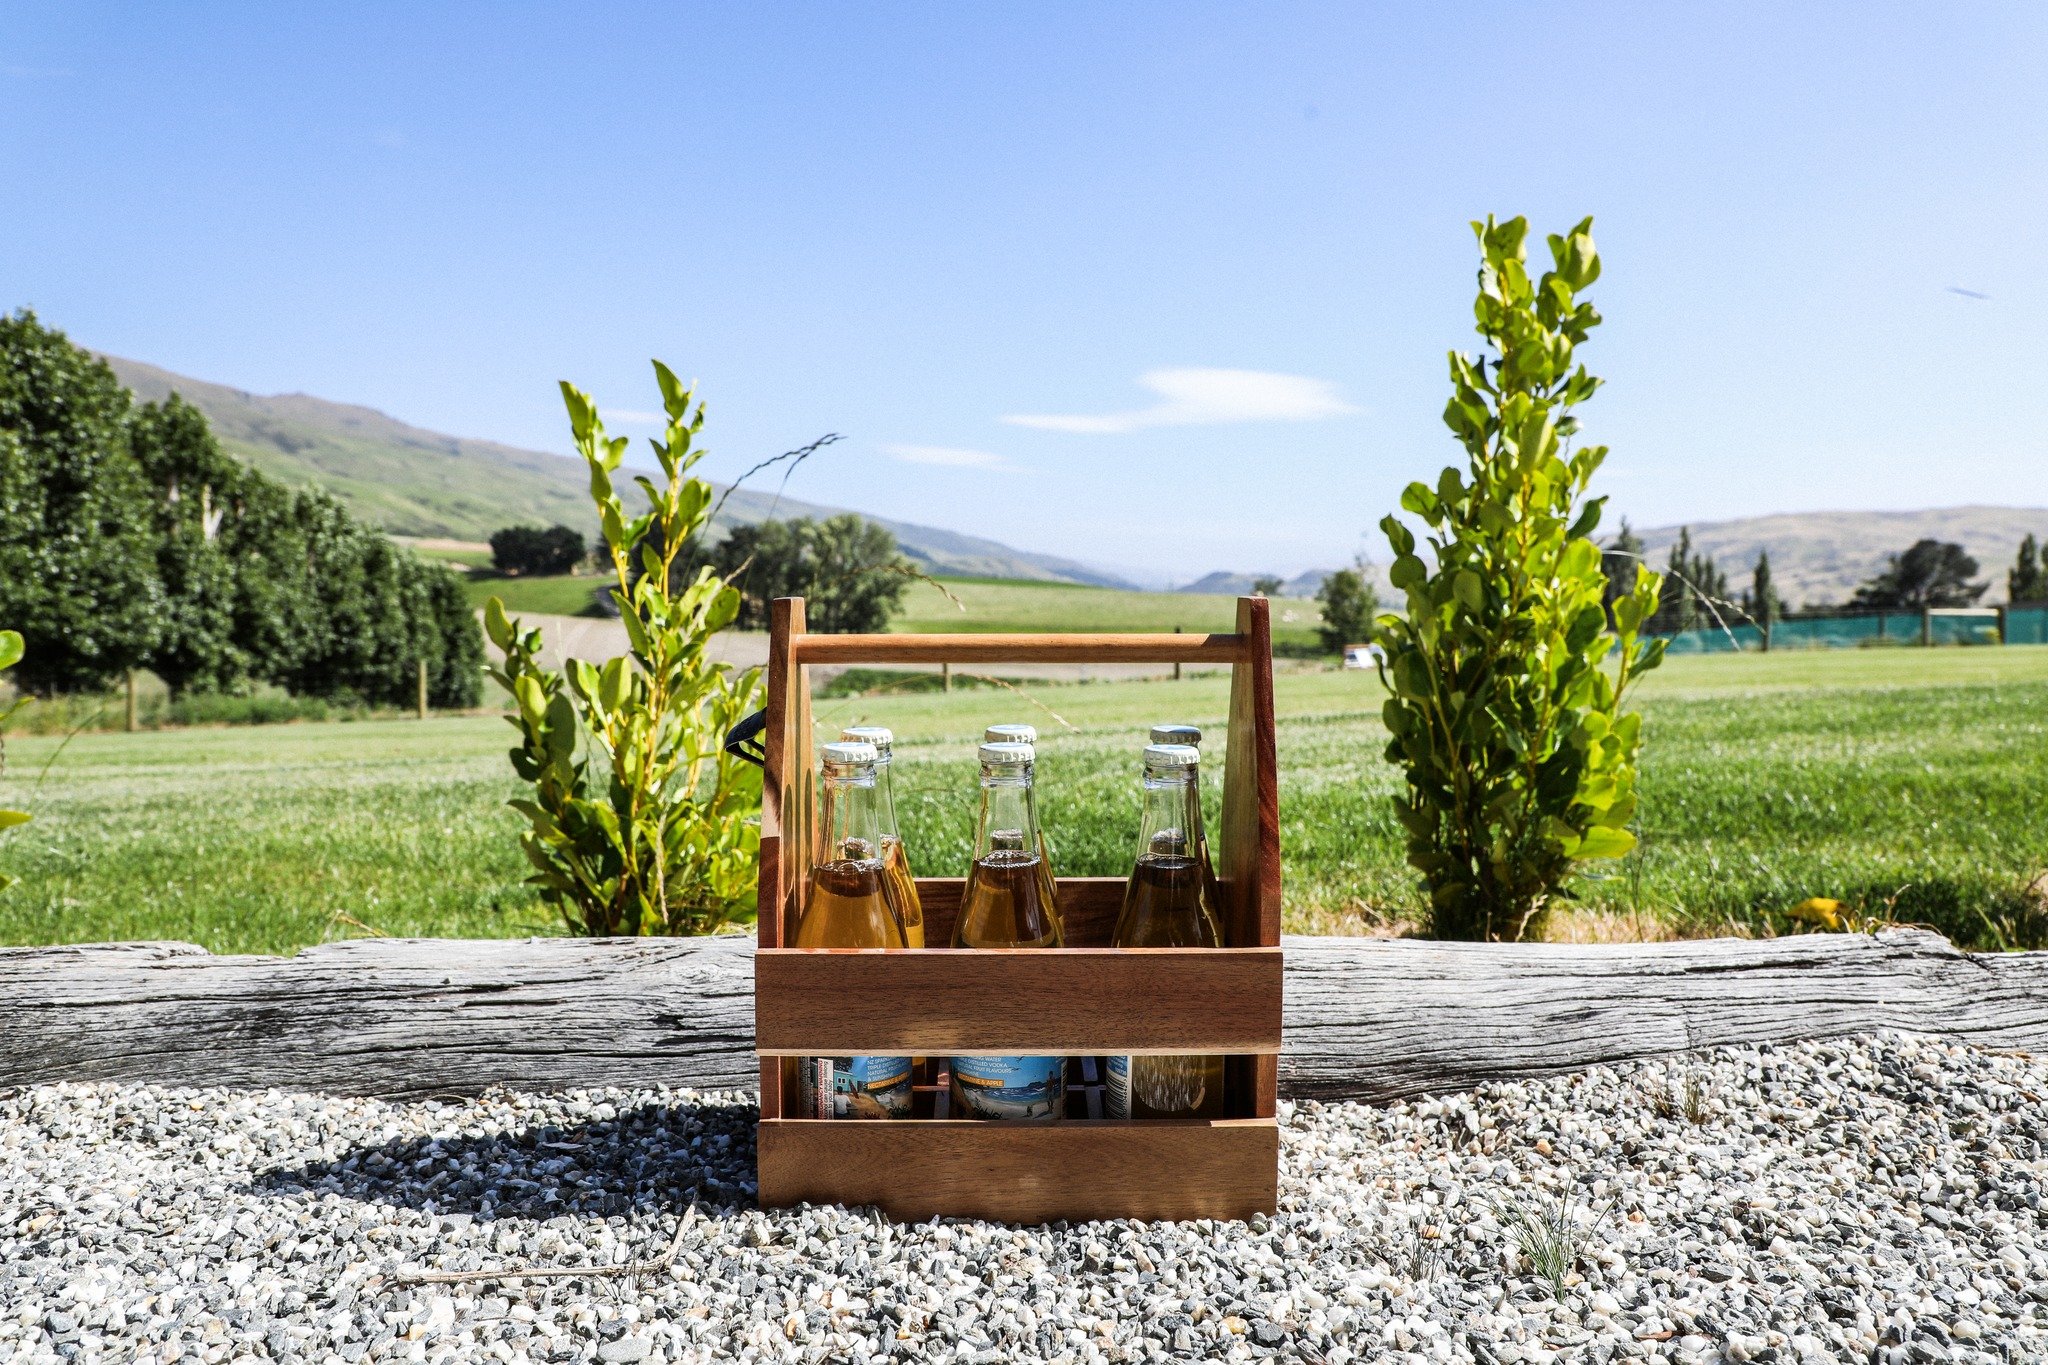 The Keepsake Beverage Caddy, crafted from acacia wood, is a distinctive and versatile gift suitable for outdoor gatherings, hospitality, and picnics. Complete with a convenient built-in brass bottle opener, it accommodates up to six cans or small bot